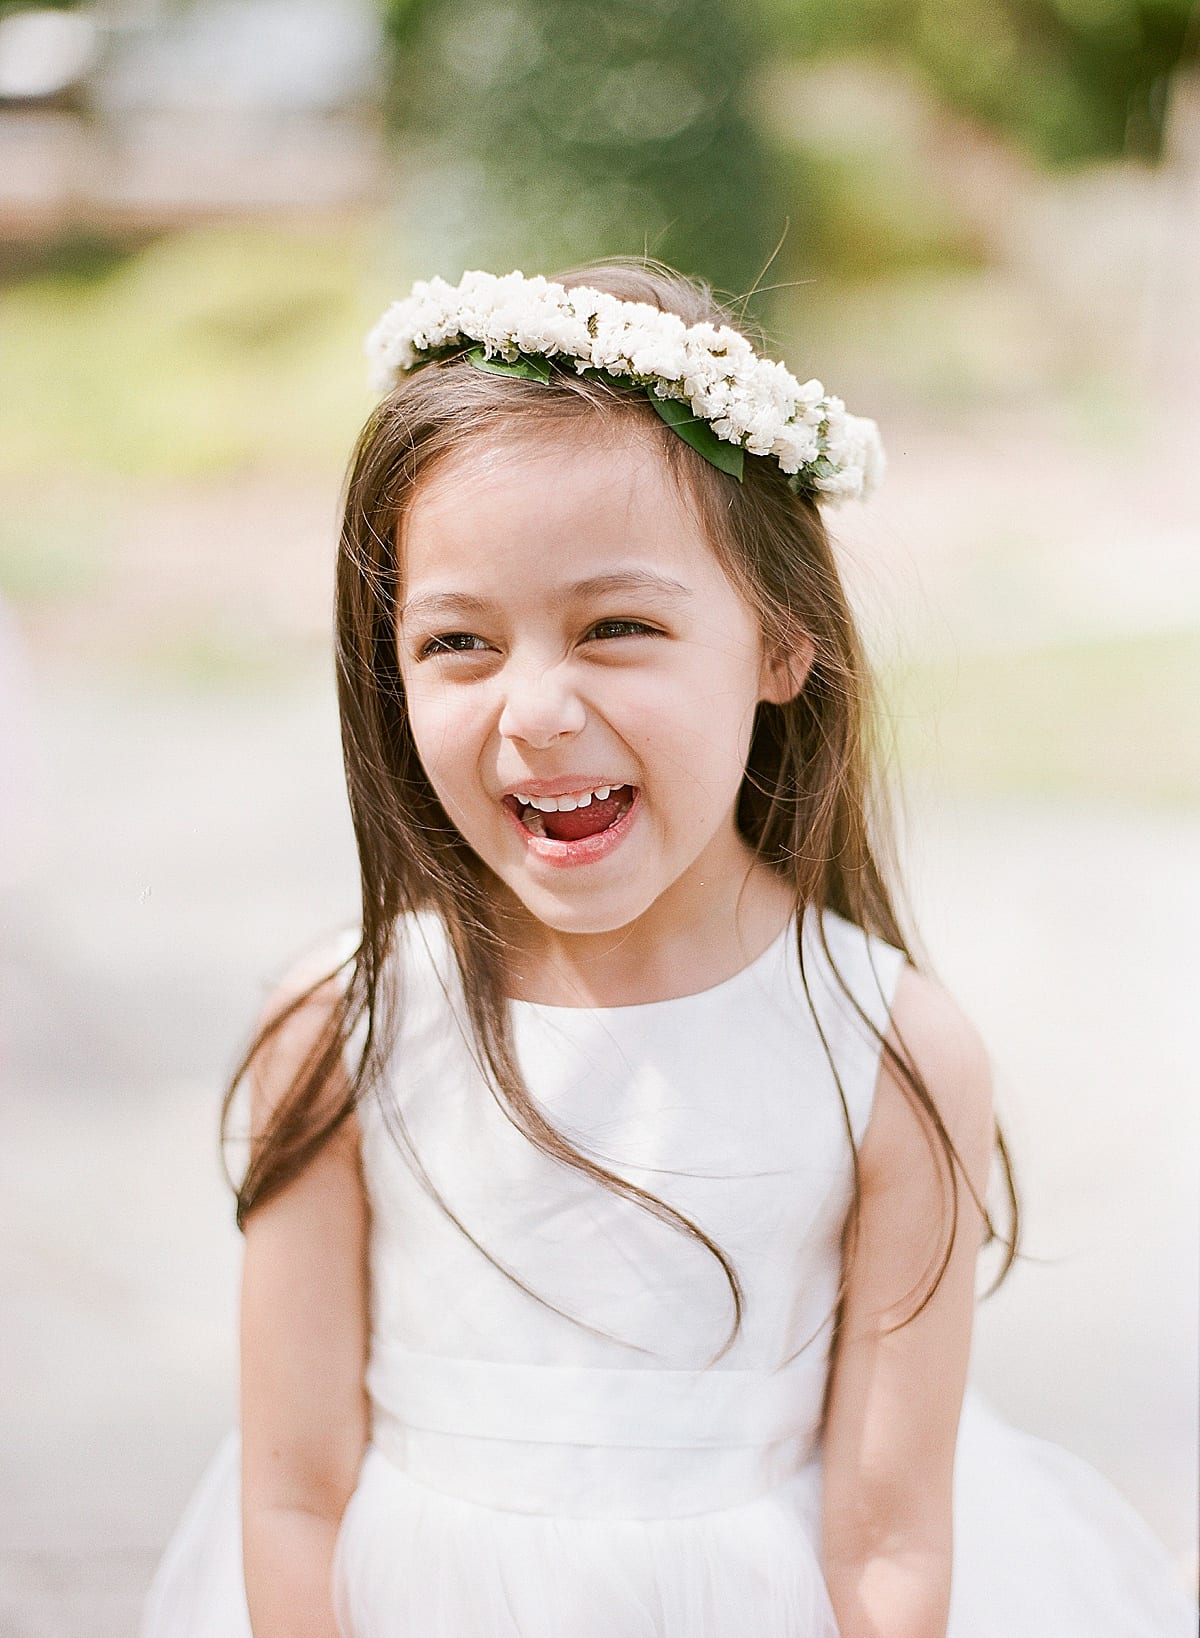 Cator Woolford Gardens Flower Girl Laughing Photo